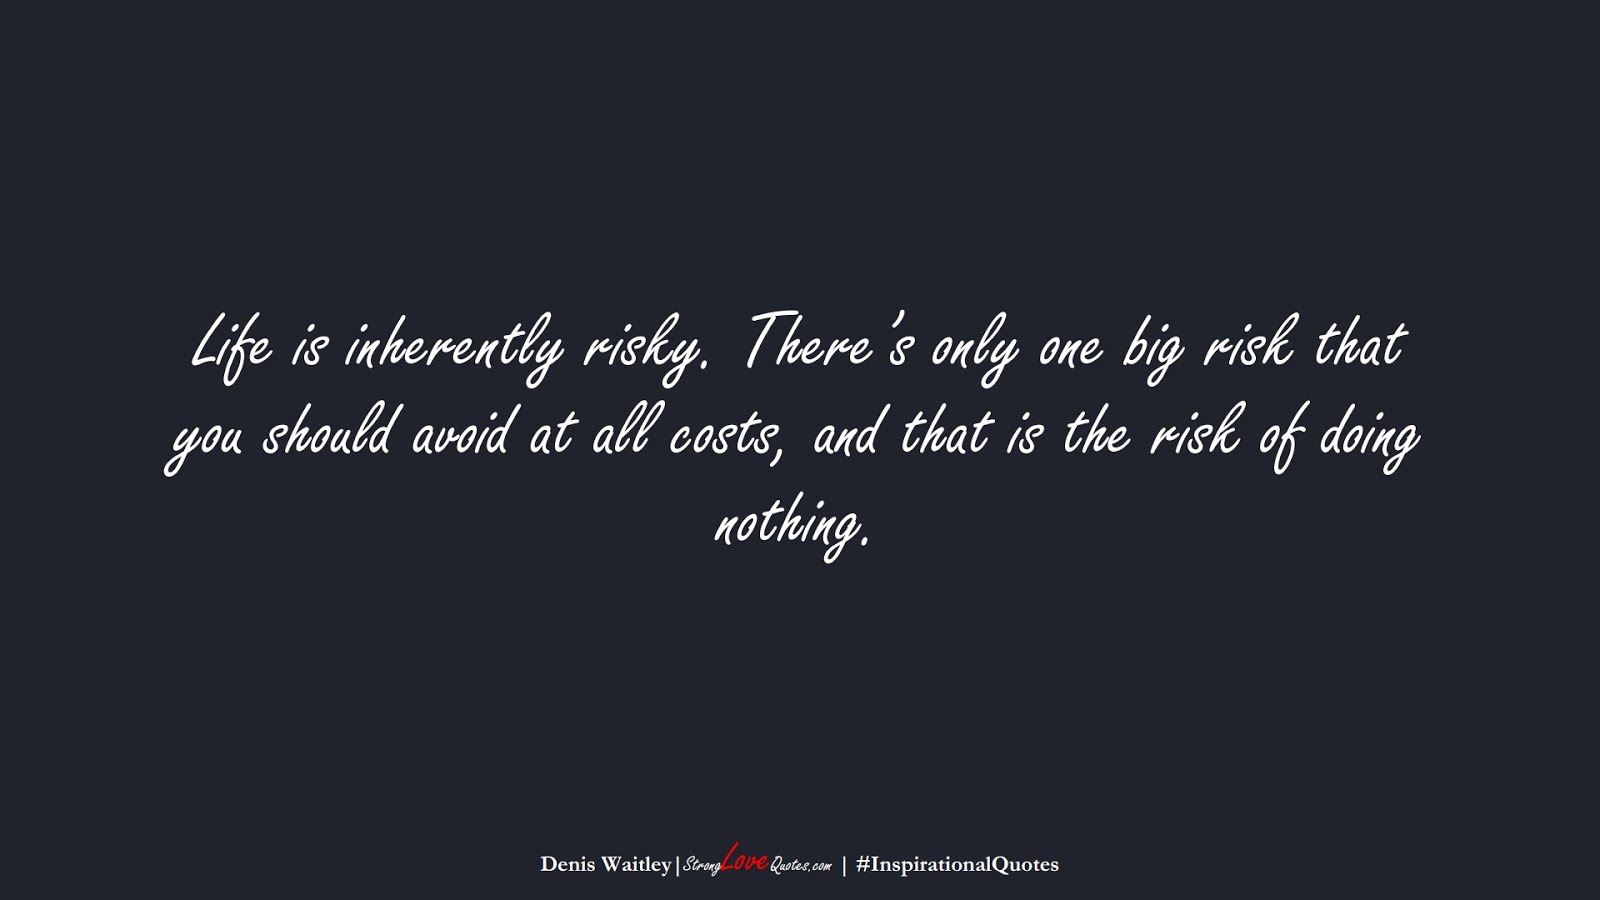 Life is inherently risky. There’s only one big risk that you should avoid at all costs, and that is the risk of doing nothing. (Denis Waitley);  #InspirationalQuotes